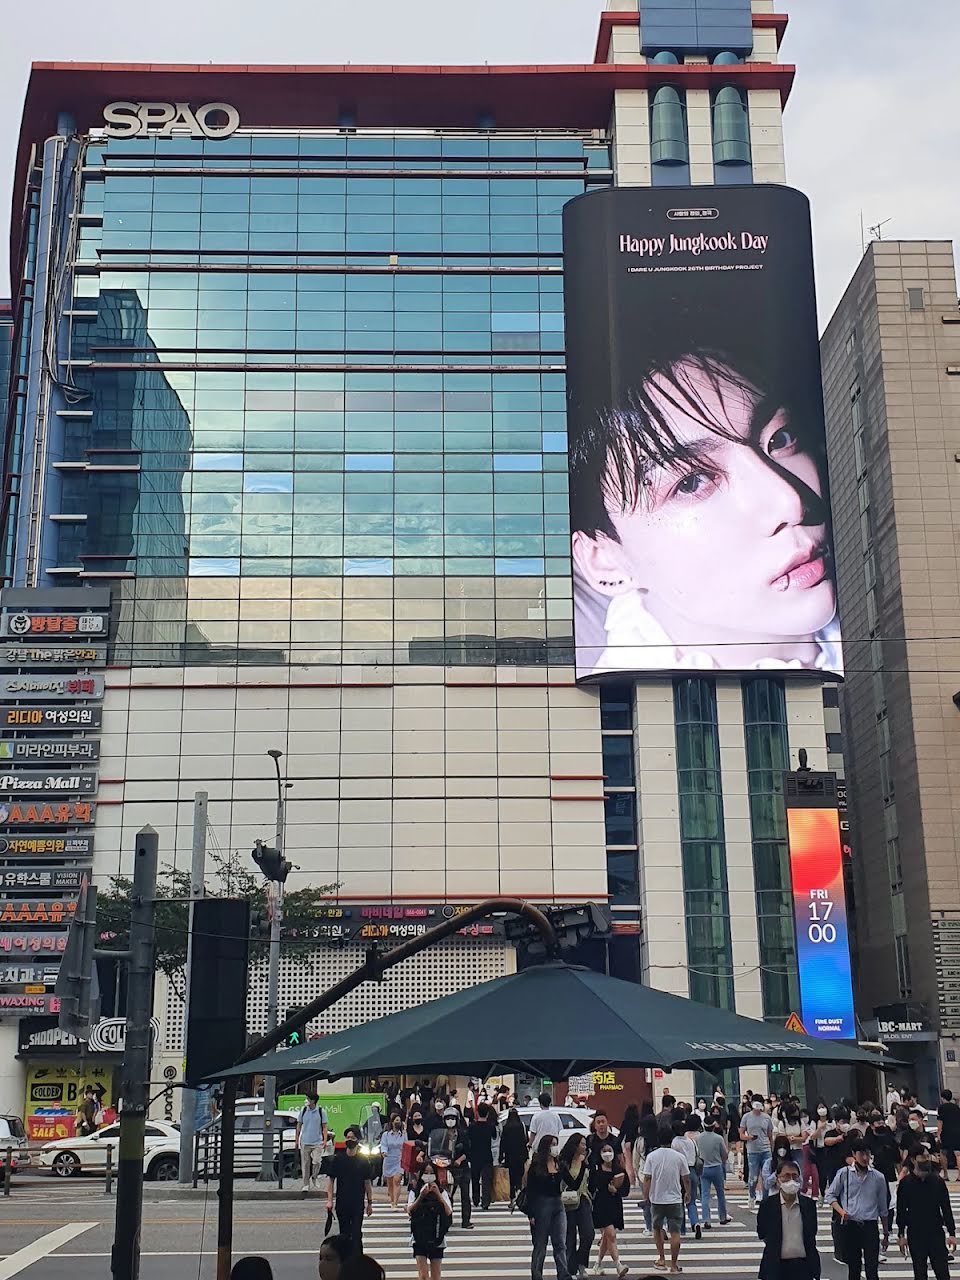 BTS Jungkook rules over Seoul prior to his birthday